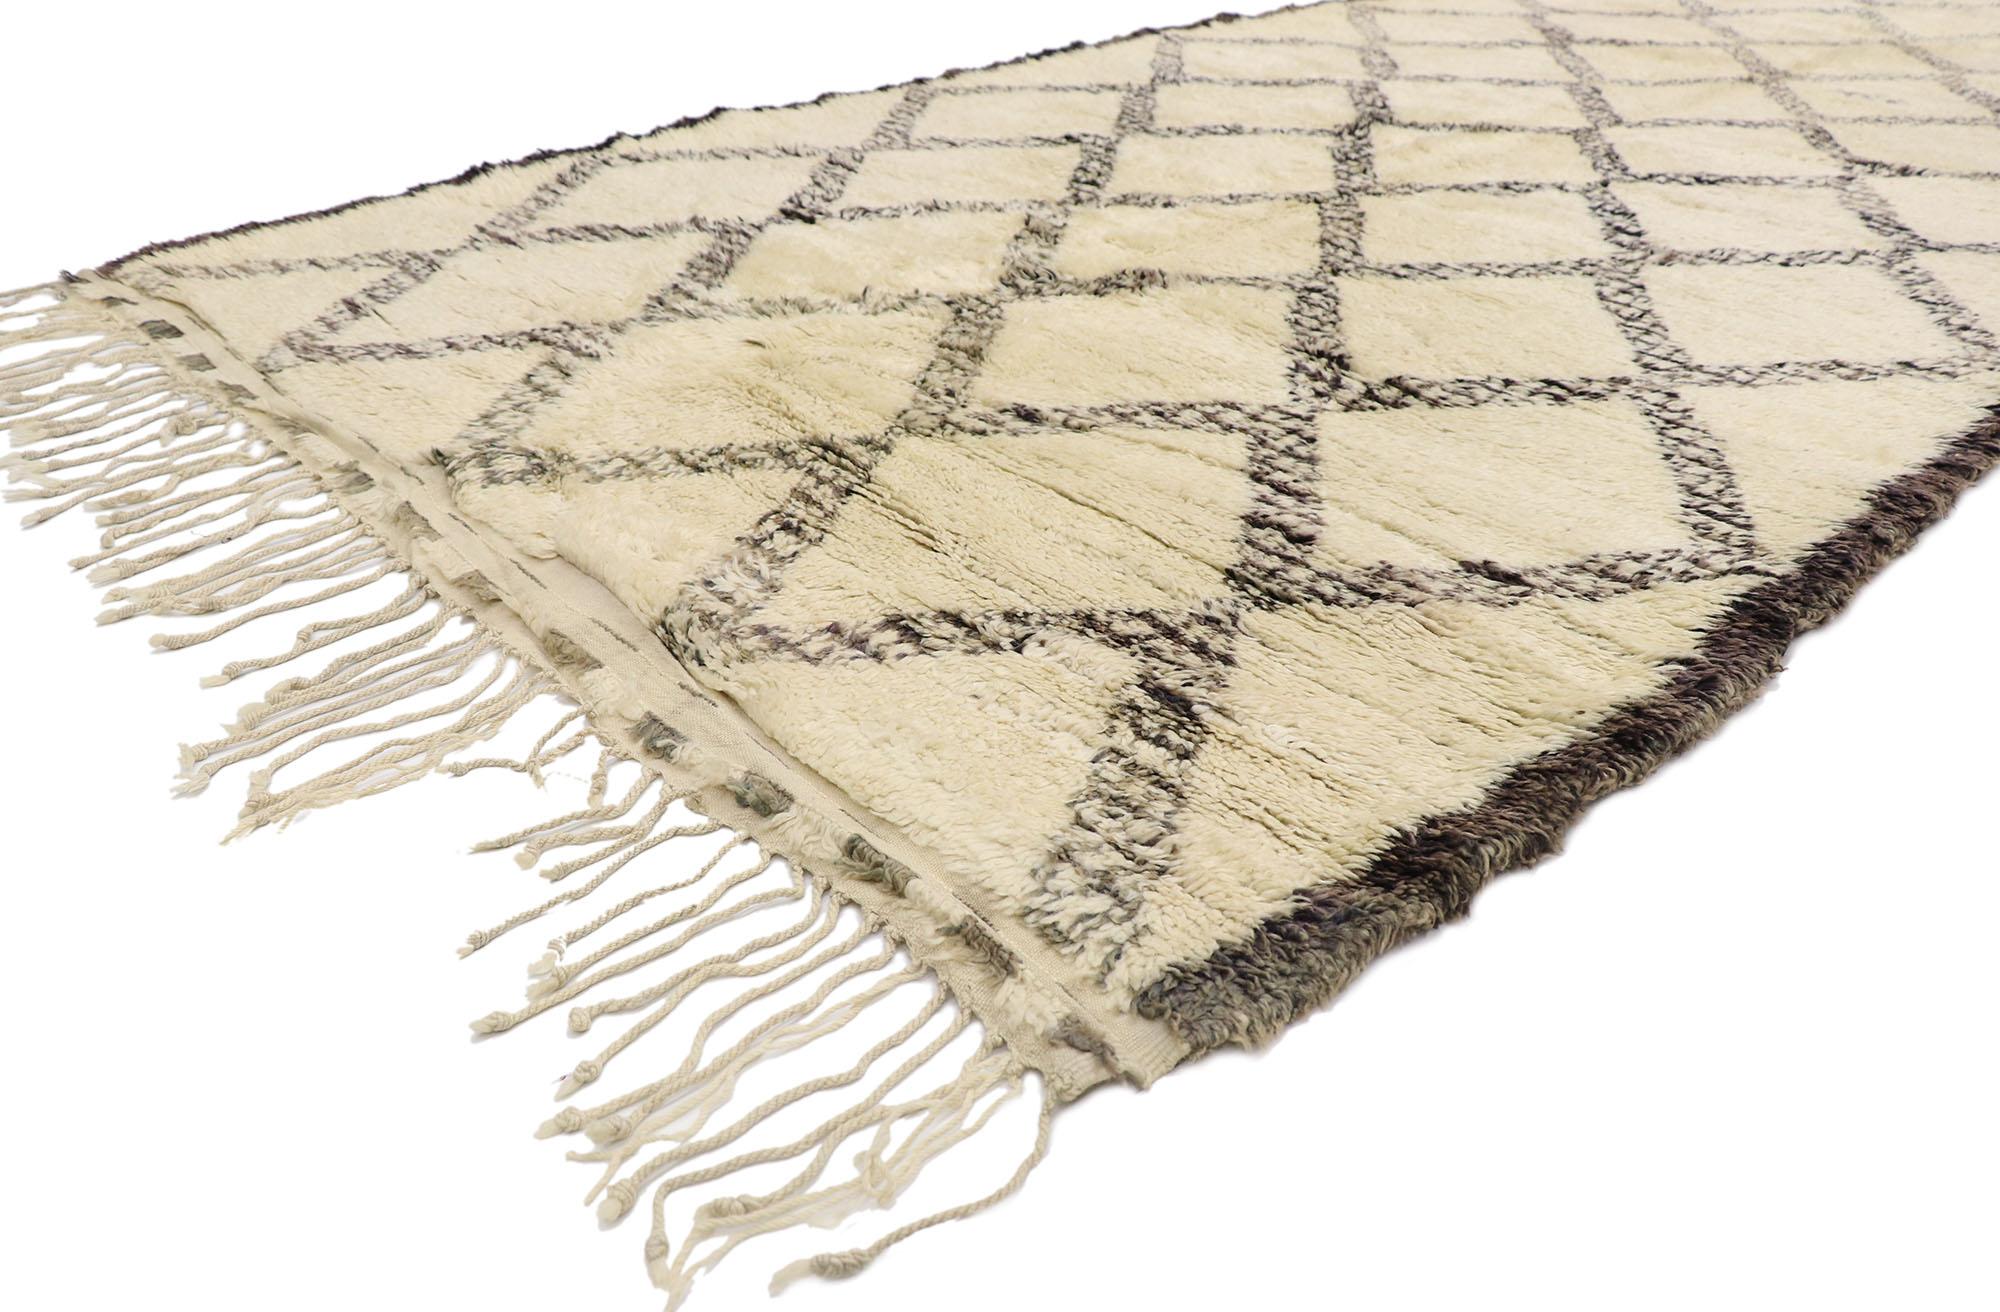 21414 Vintage Berber Beni Ourain Moroccan rug with Mid-Century Modern Style 06'00 x 12'04. With its simplicity, plush pile and Mid-Century Modern style, this hand knotted wool vintage Berber Beni Ourain Moroccan rug is a captivating vision of woven